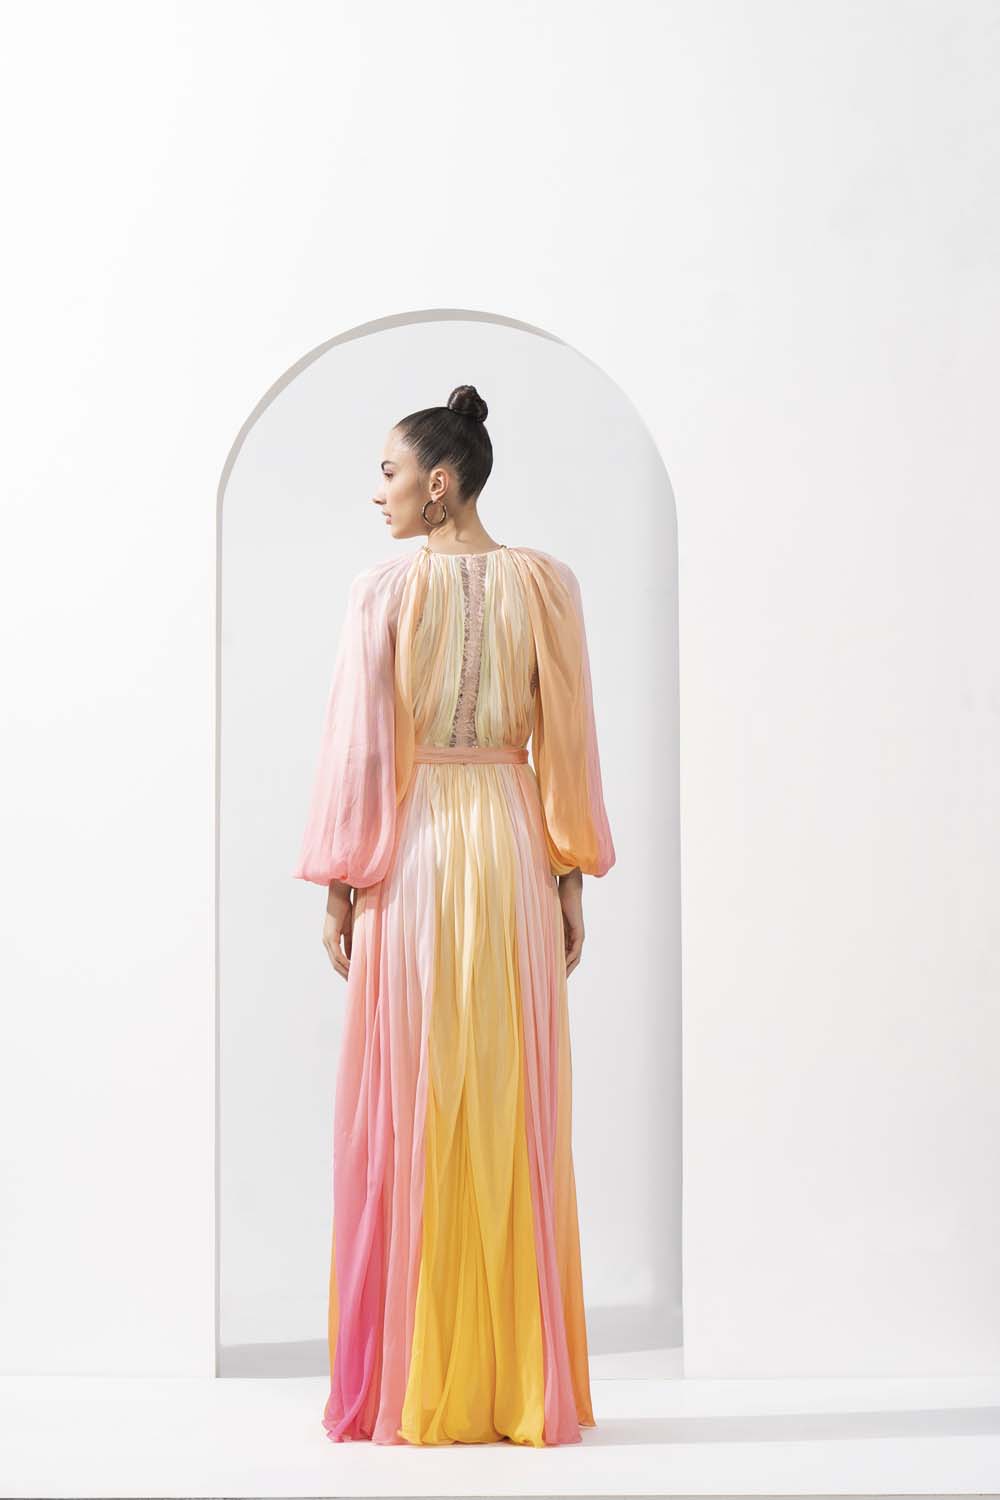 Multicolor ombre printed chiffon dress with a slit and hand-embroidered belt with Chantley detailing.